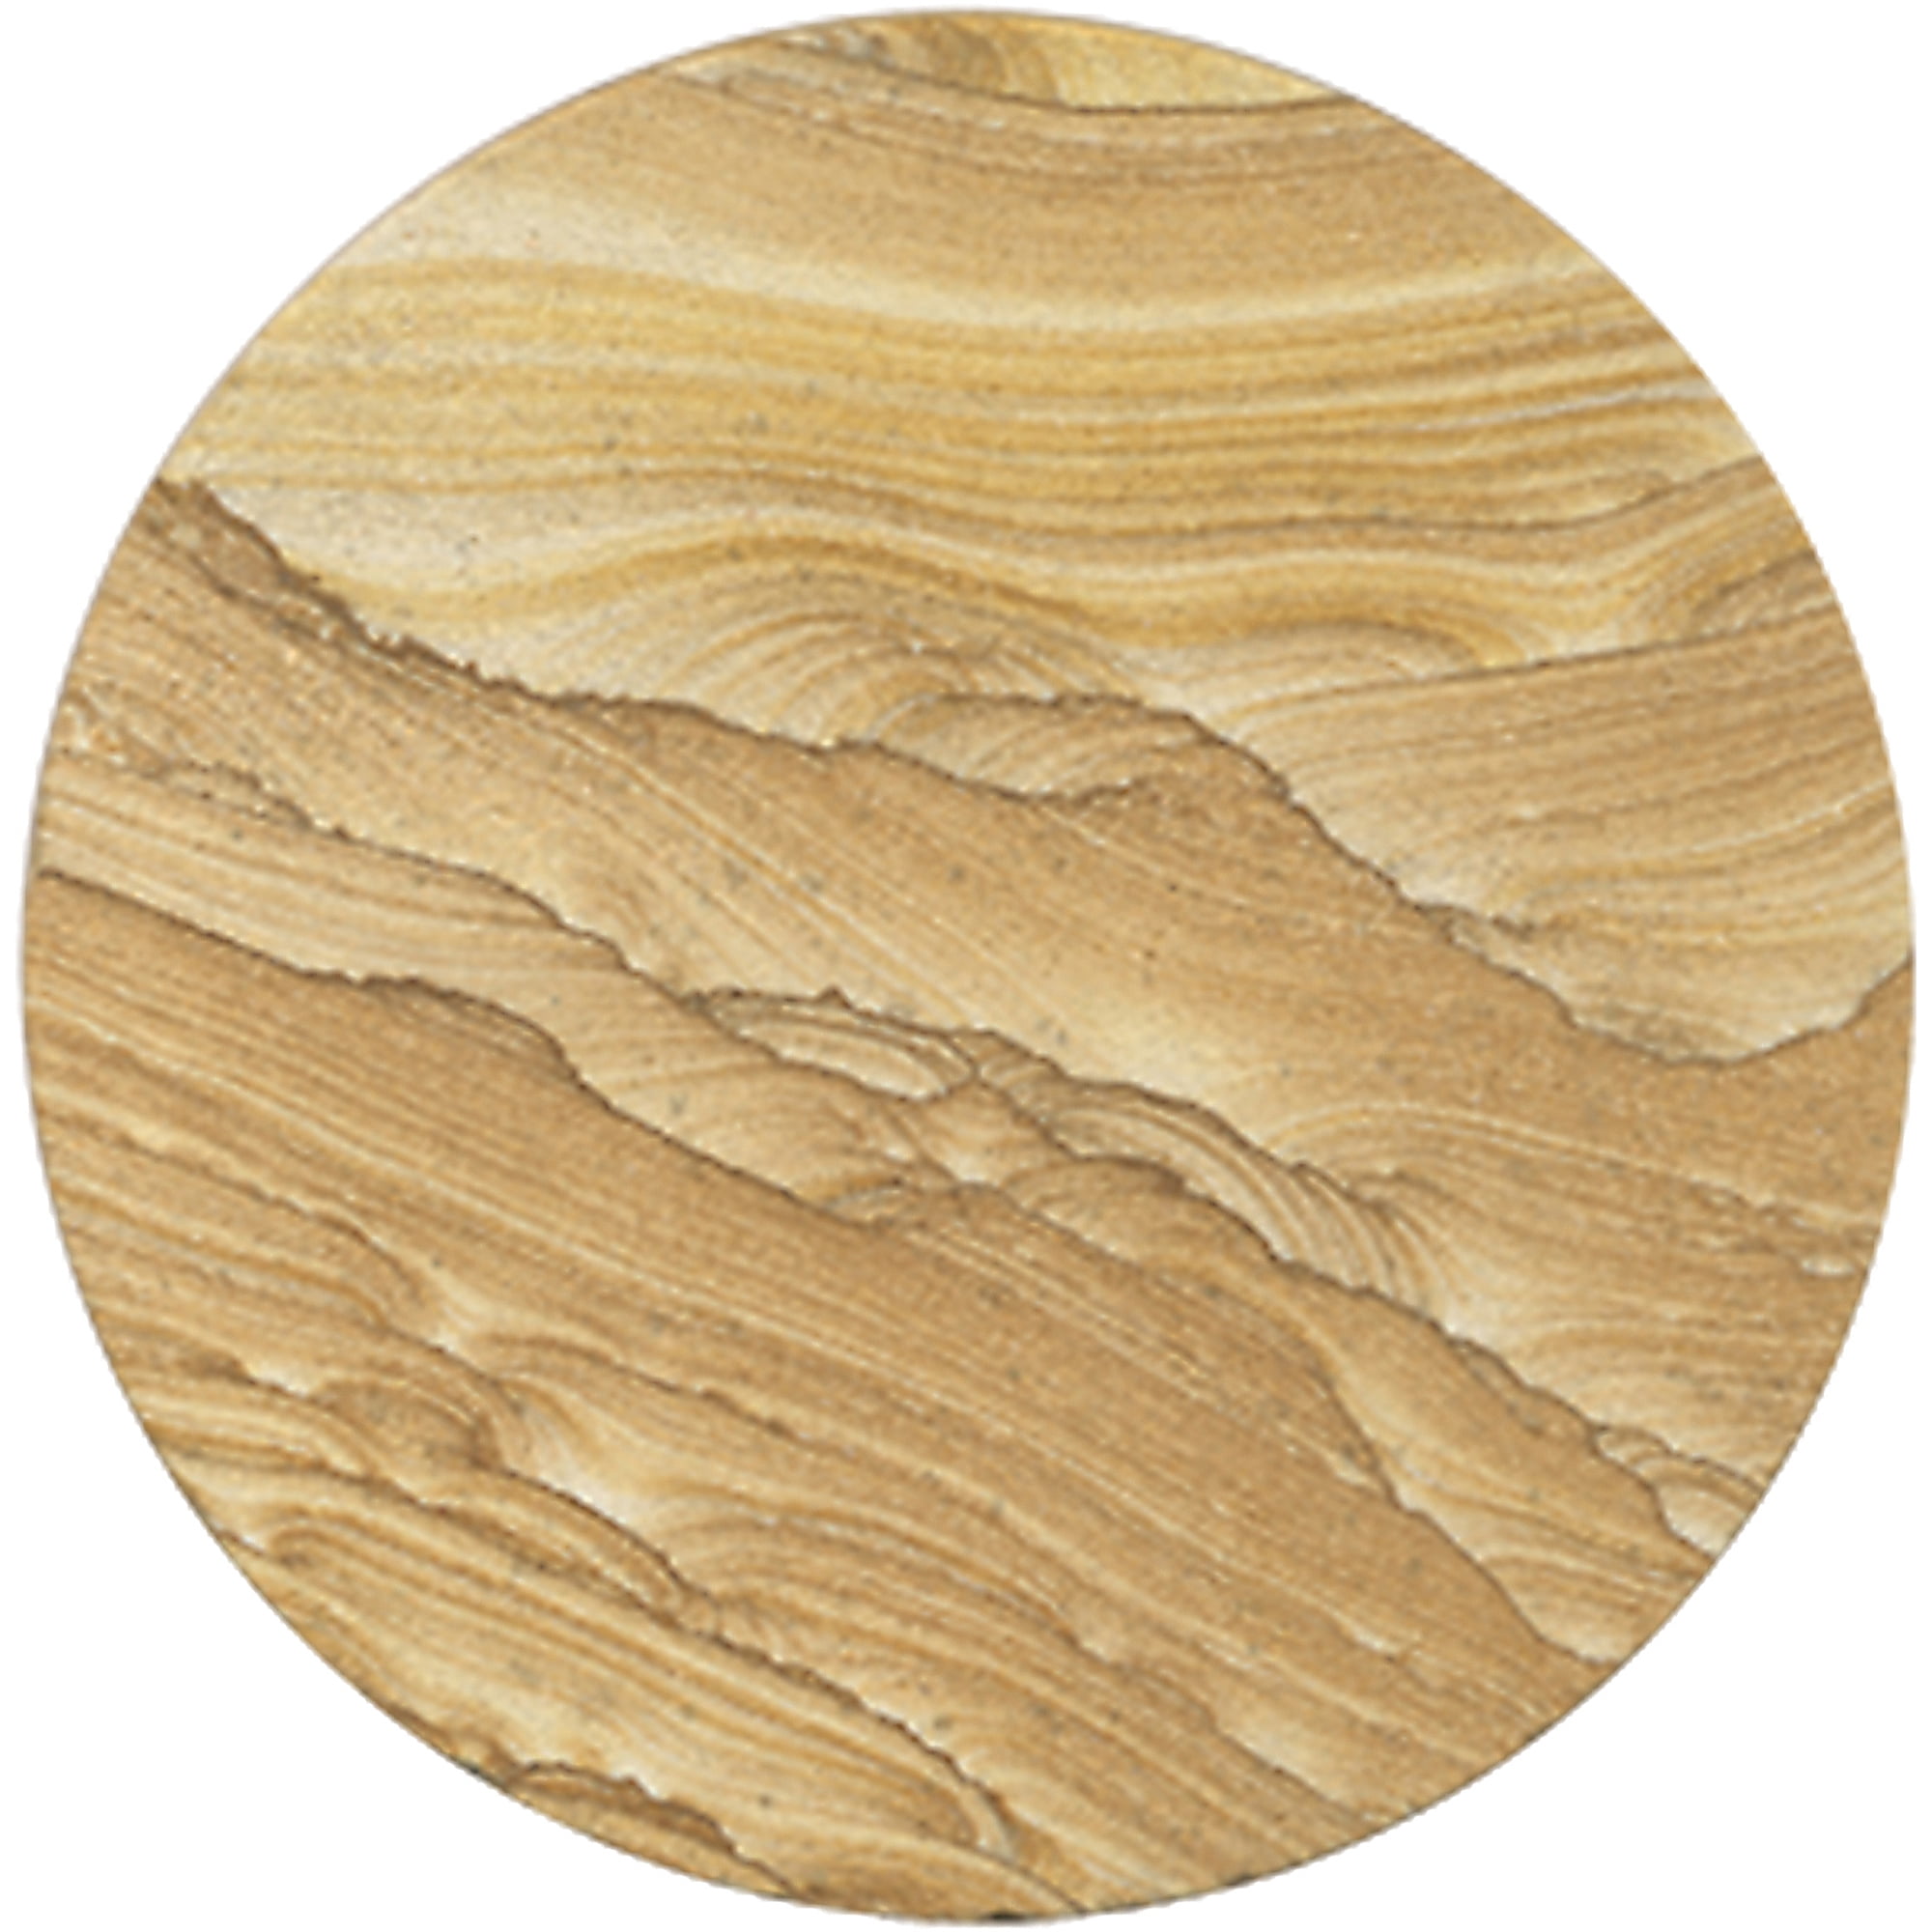 Multicolor All Natural Sandstone-Durable Stone Thirstystone Cinnabar Brand